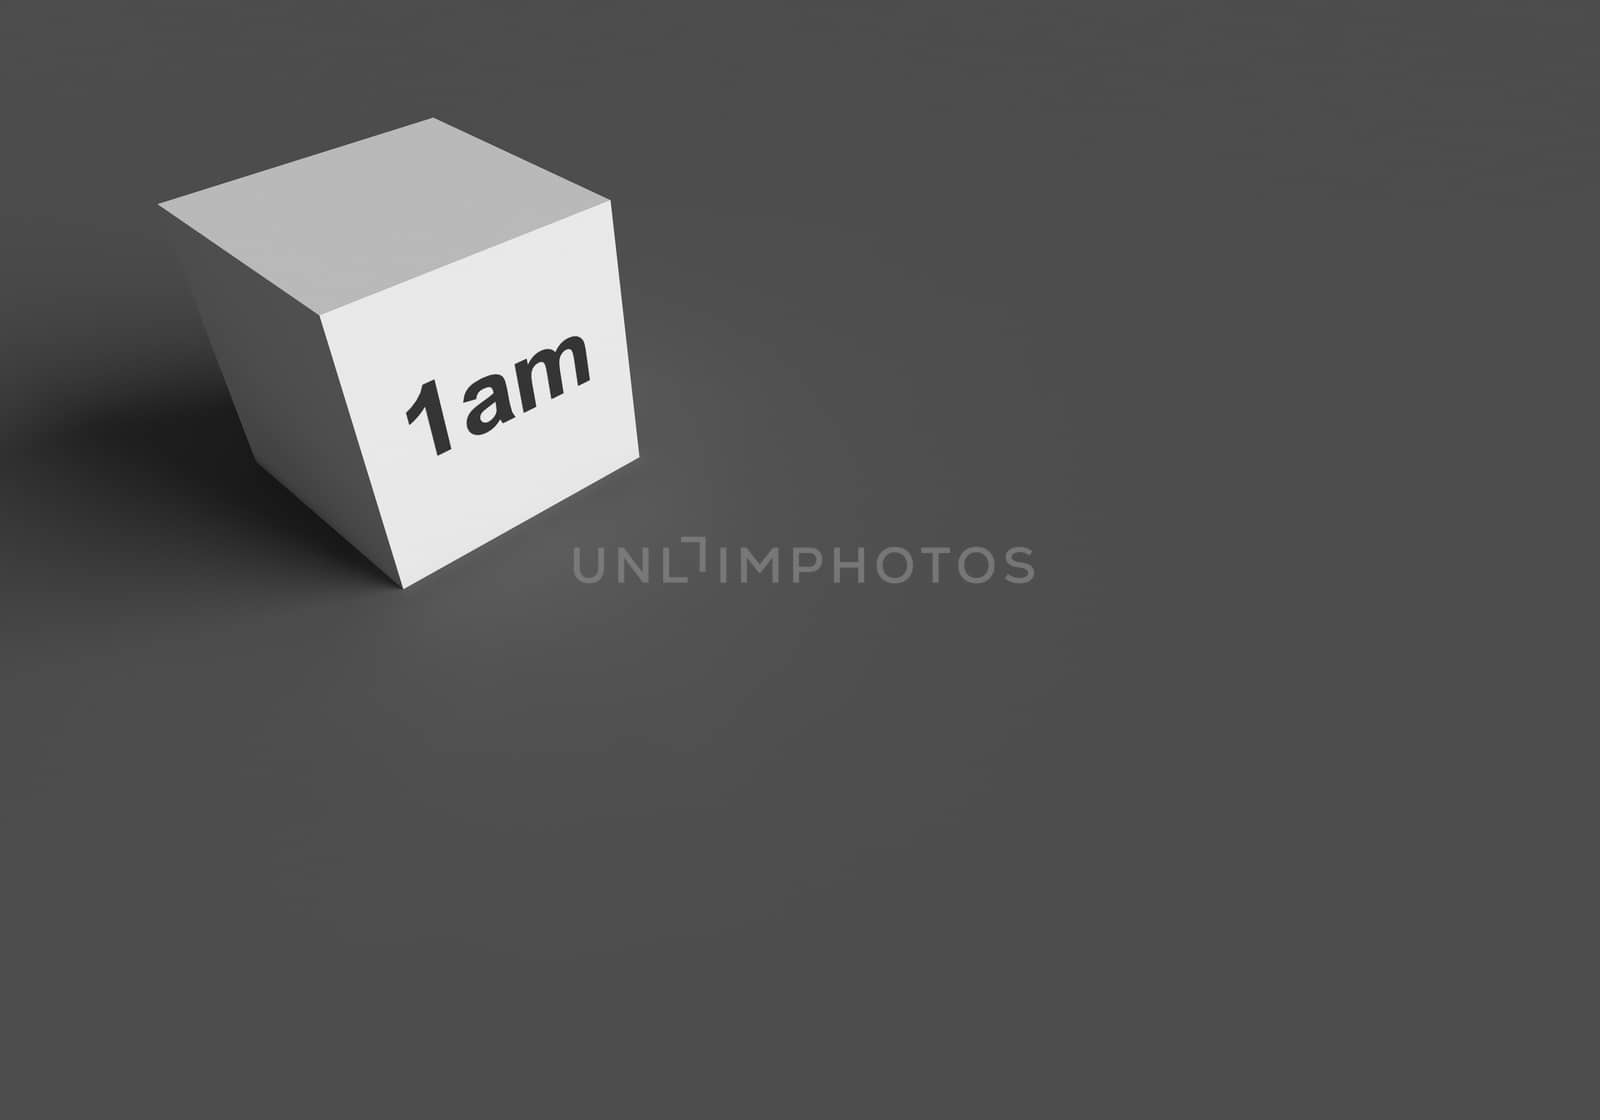 3D RENDERING WORDS 1 am ON WHITE CUBE by PrettyTG